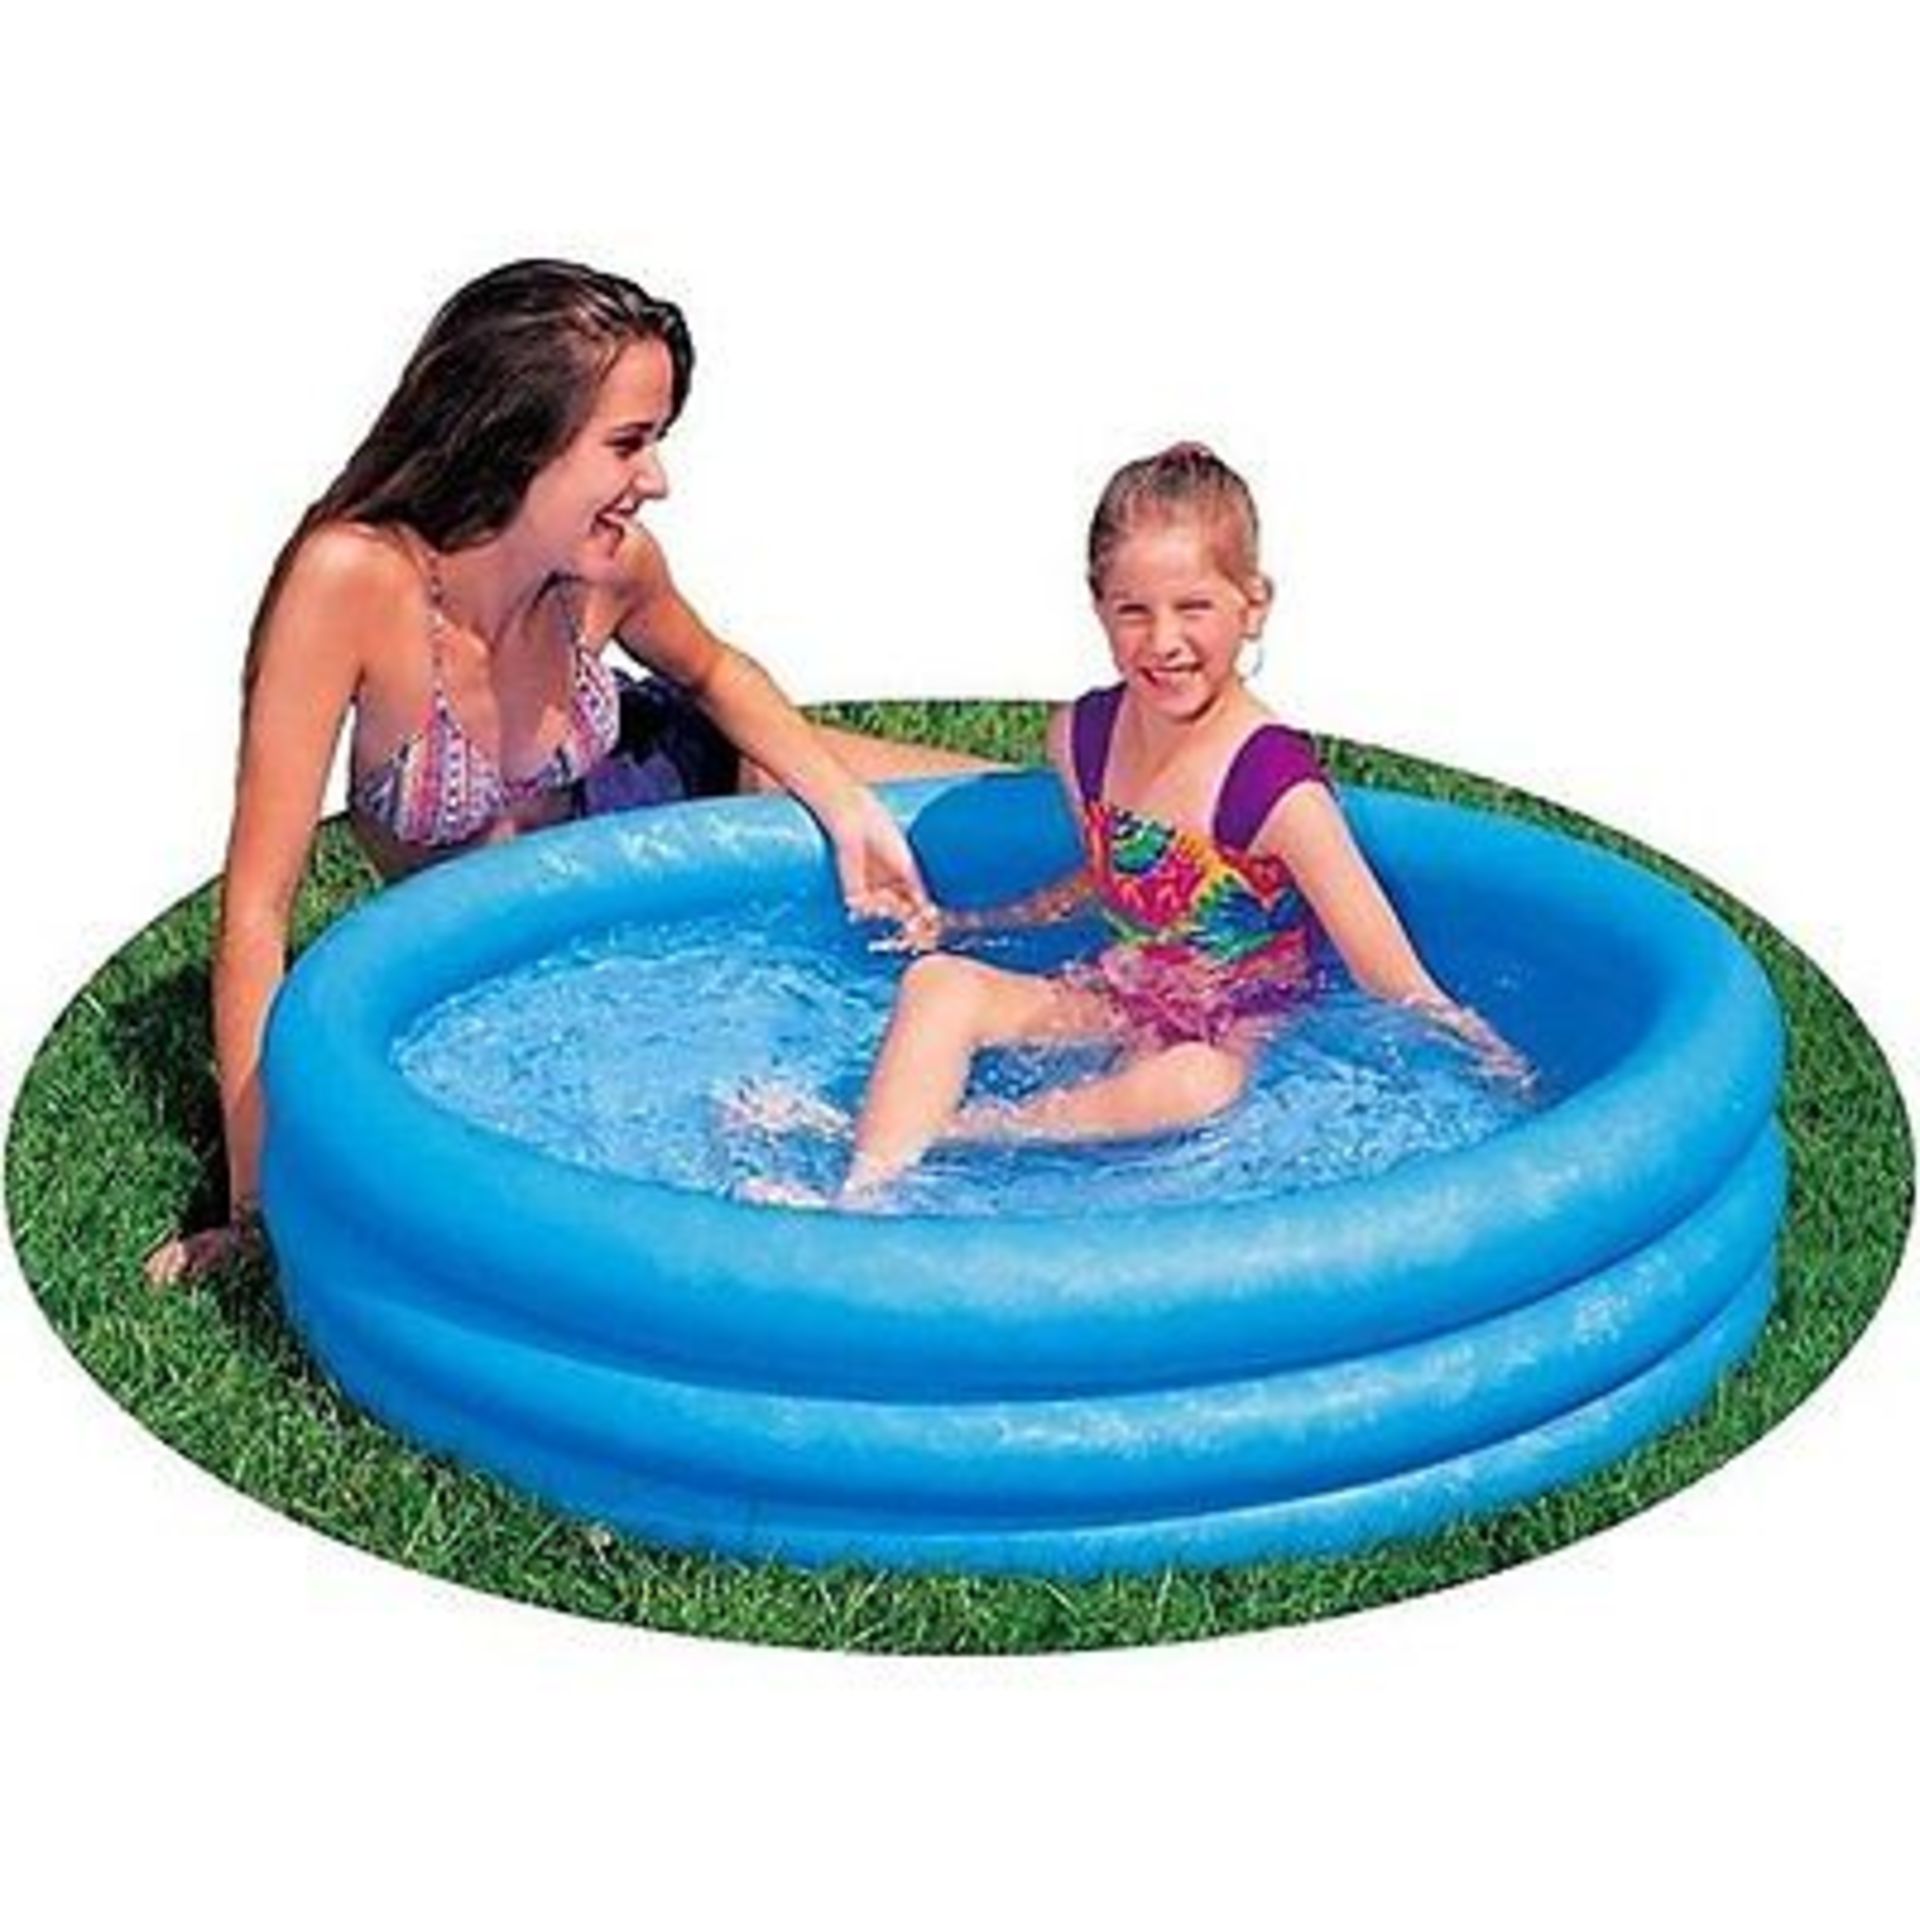 V *TRADE QTY* Brand New Kids Outdoor Three Ring Pool Age 3 Years + ISP £7.49 (Ebay) X 4 YOUR BID